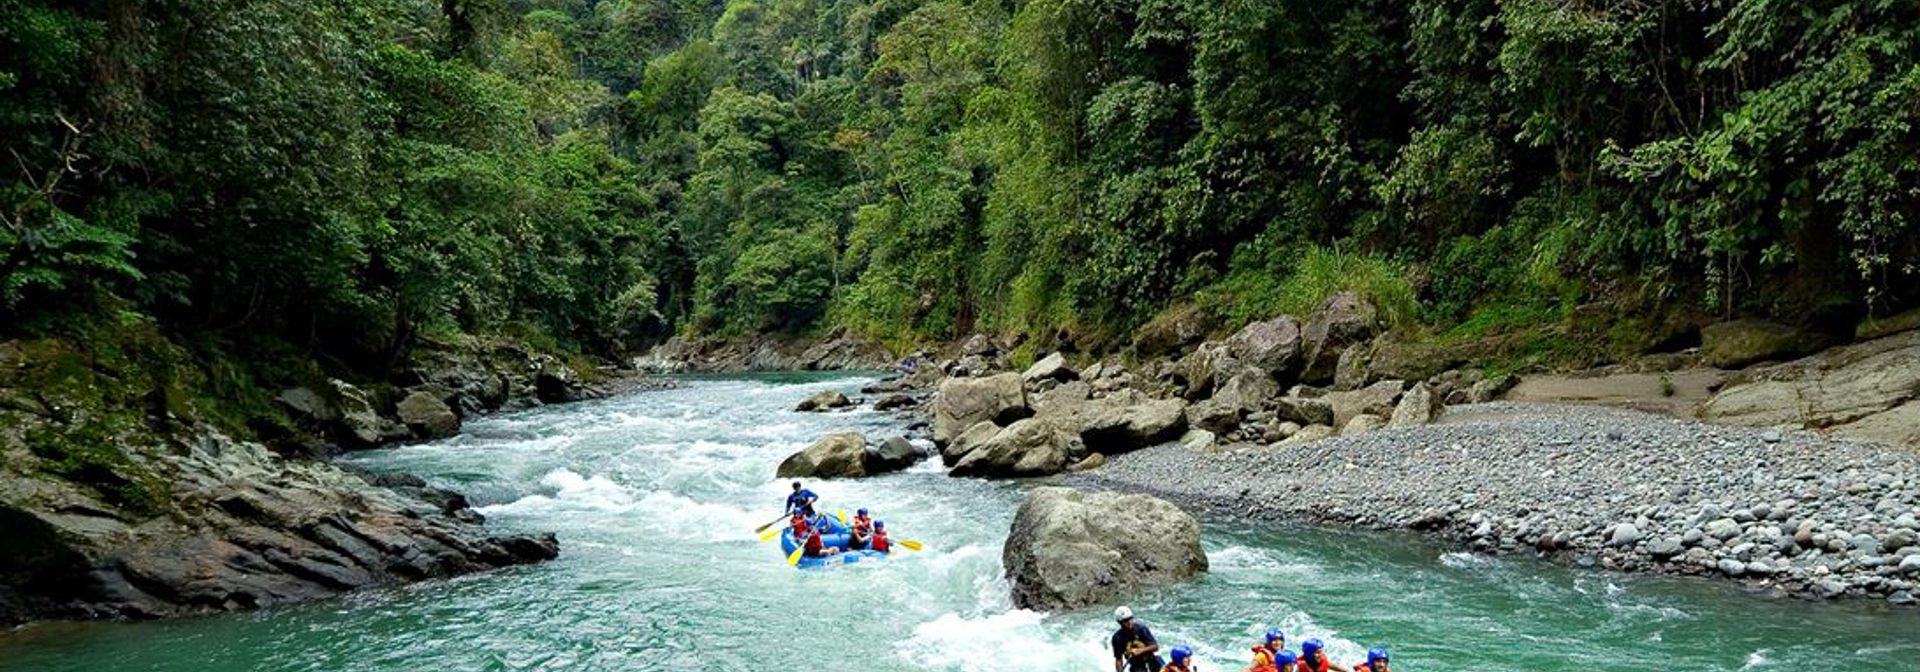 costa rica - pacuare river_rafting_04